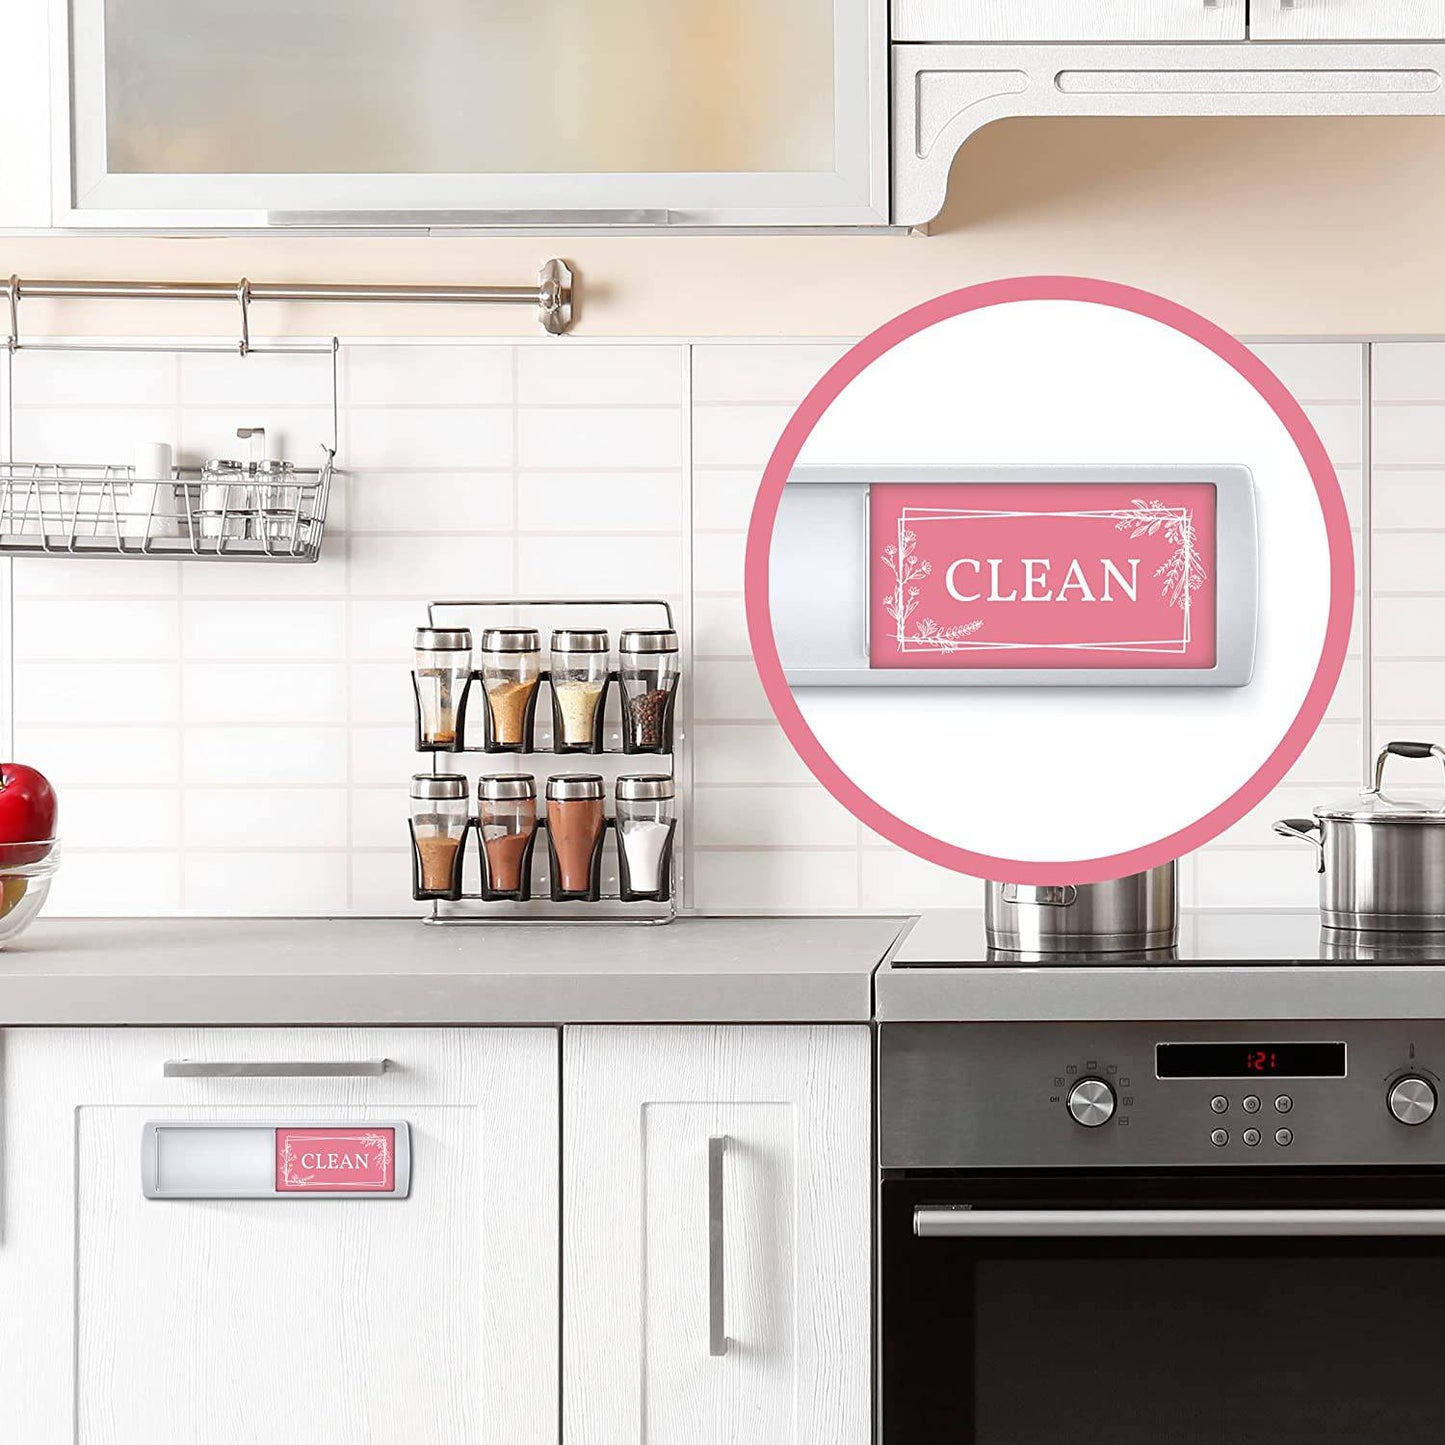 Clean Dirty Dishwasher Magnet (Pink / Grey) - ASSURED SIGNS